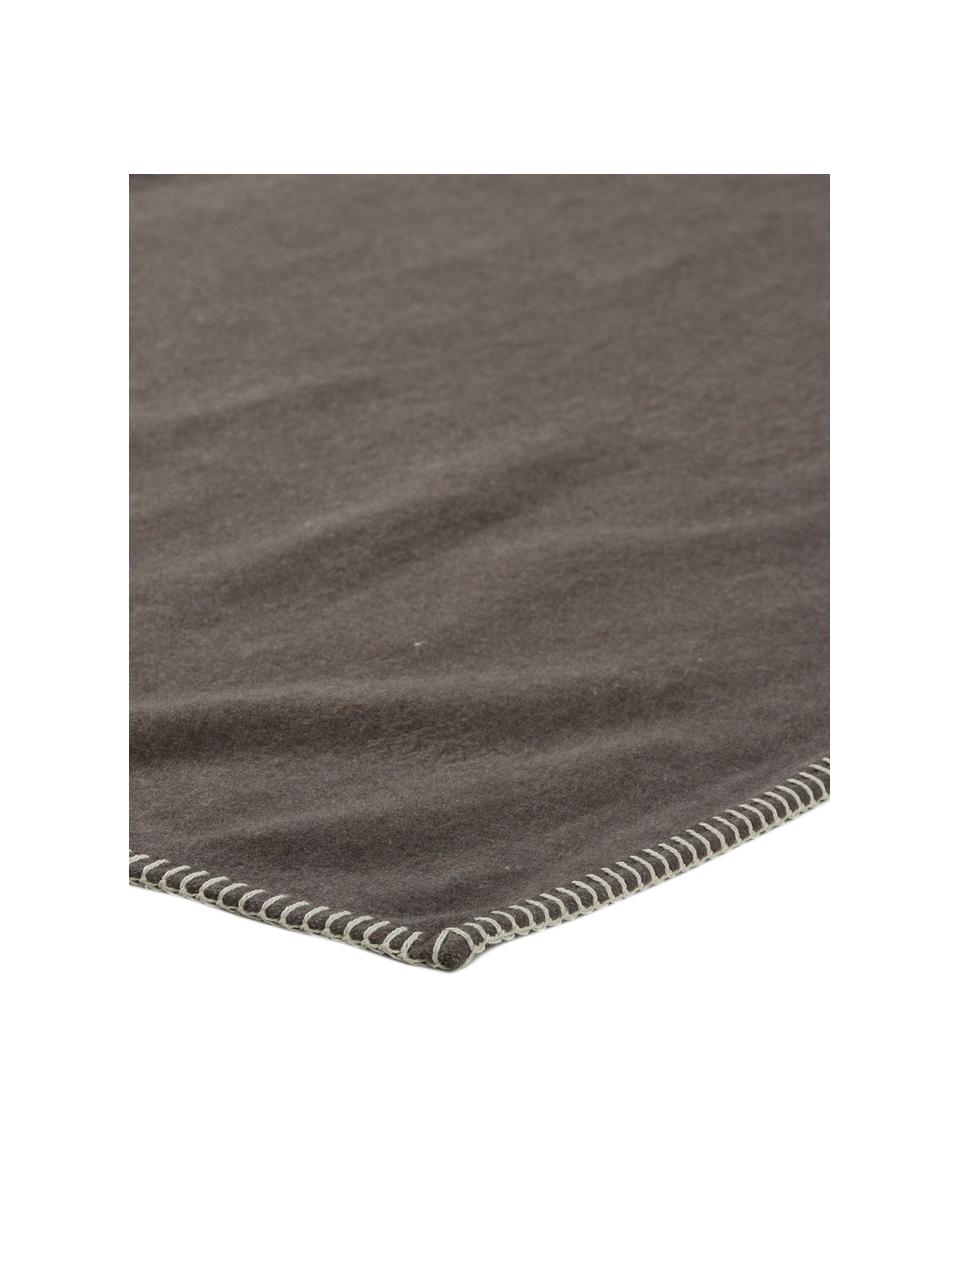 Coperta in cotone color taupe con cuciture decorative Sylt, Taupe, Larg. 140 x Lung. 200 cm